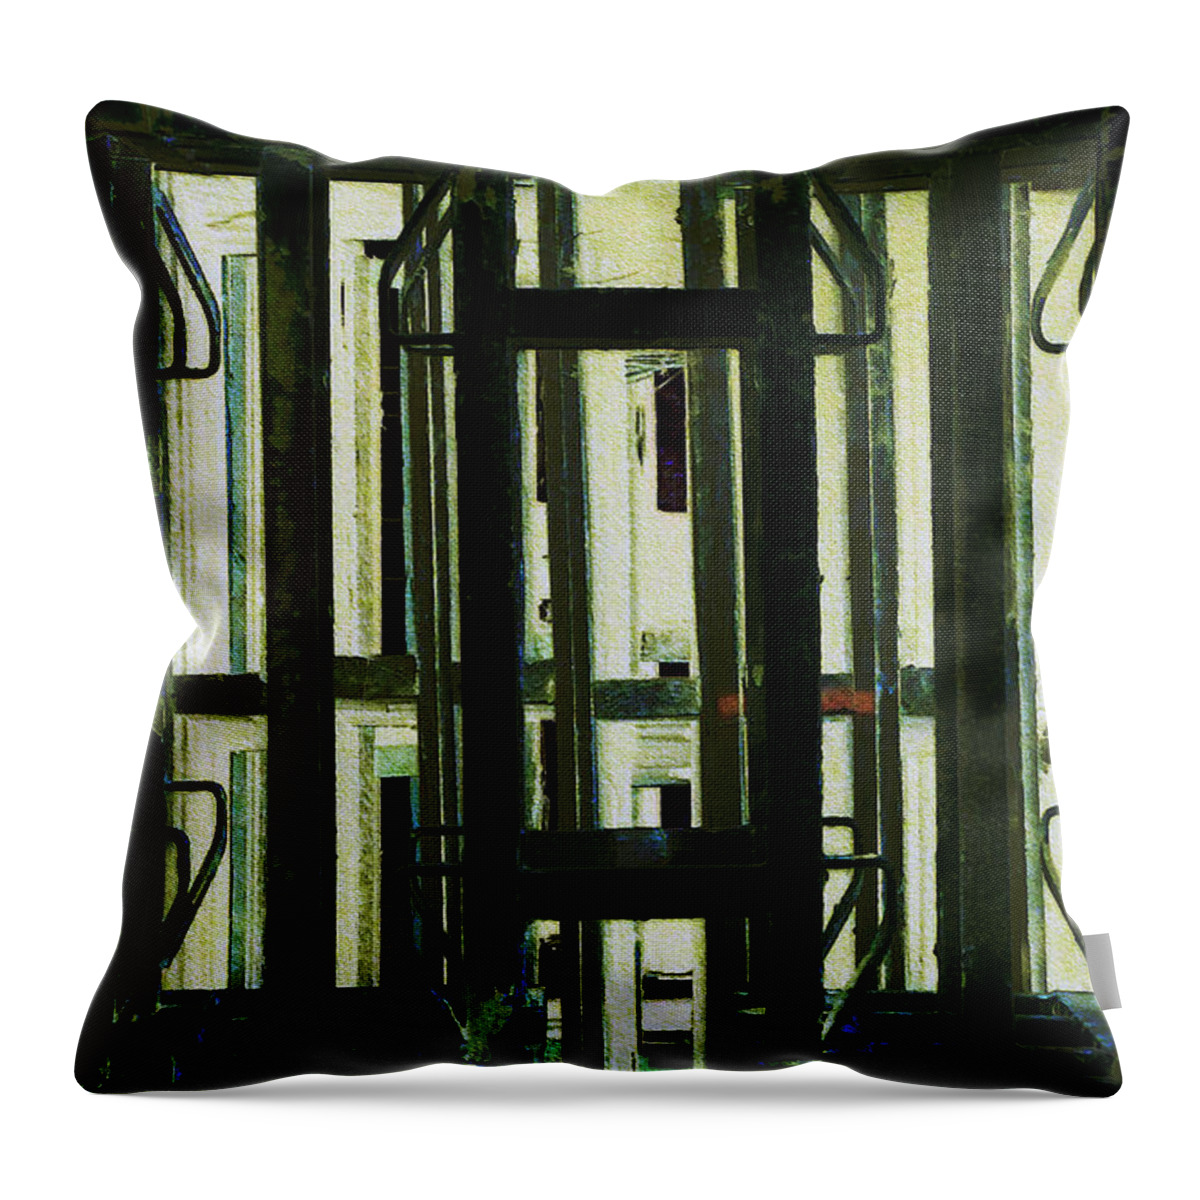 Digital Art Throw Pillow featuring the digital art Stacked Metal Pallets 2 by Kae Cheatham